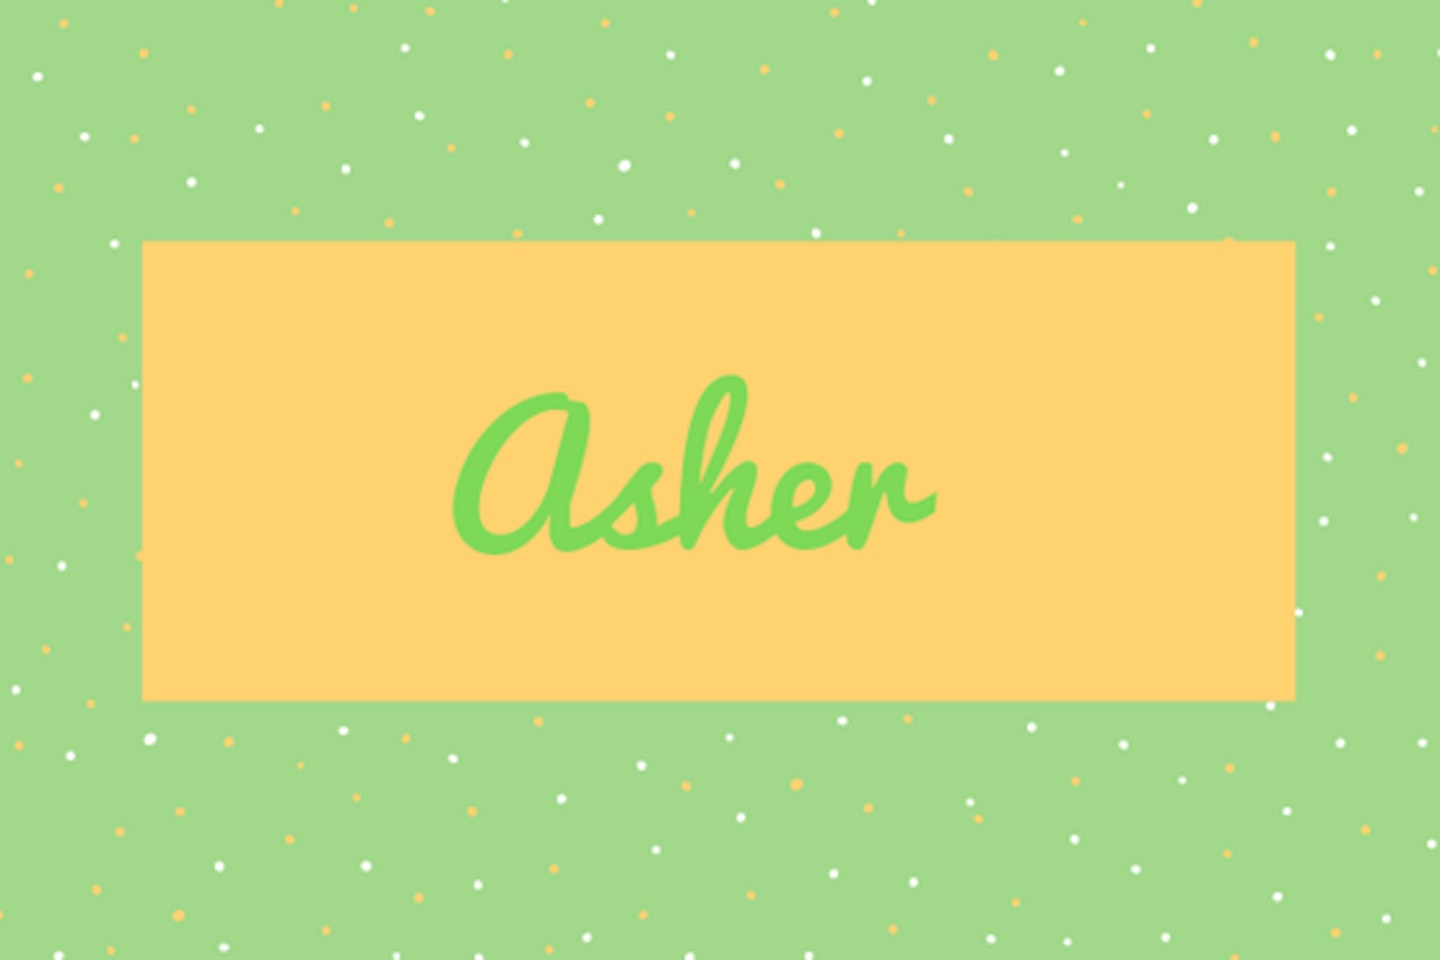 10) Asher